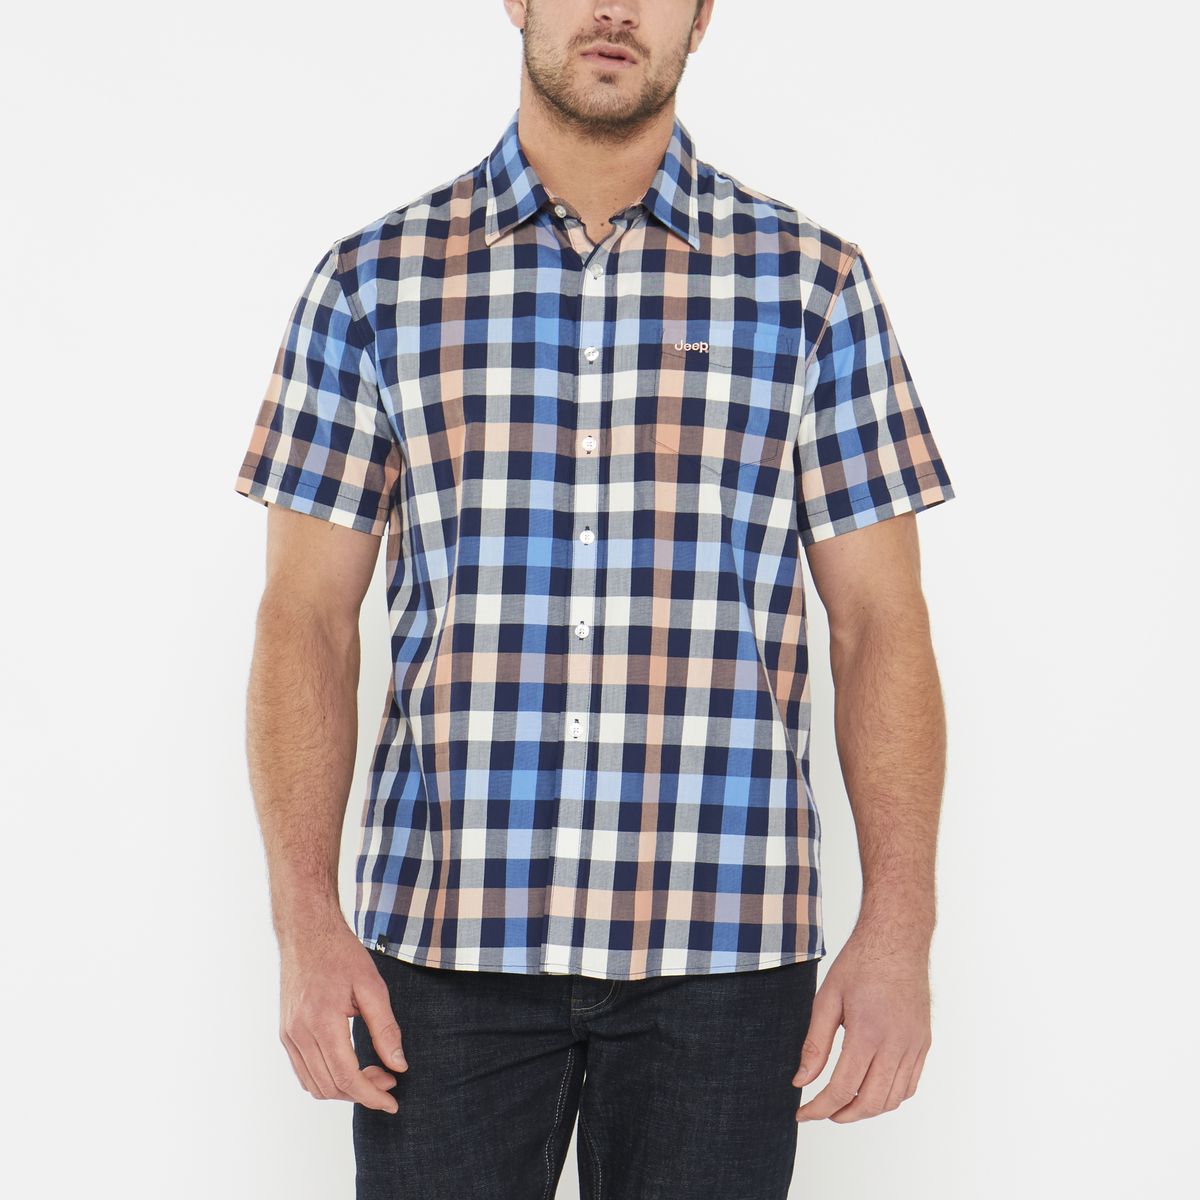 Jeep Casual Check Shirt | Shop Today. Get it Tomorrow! | takealot.com